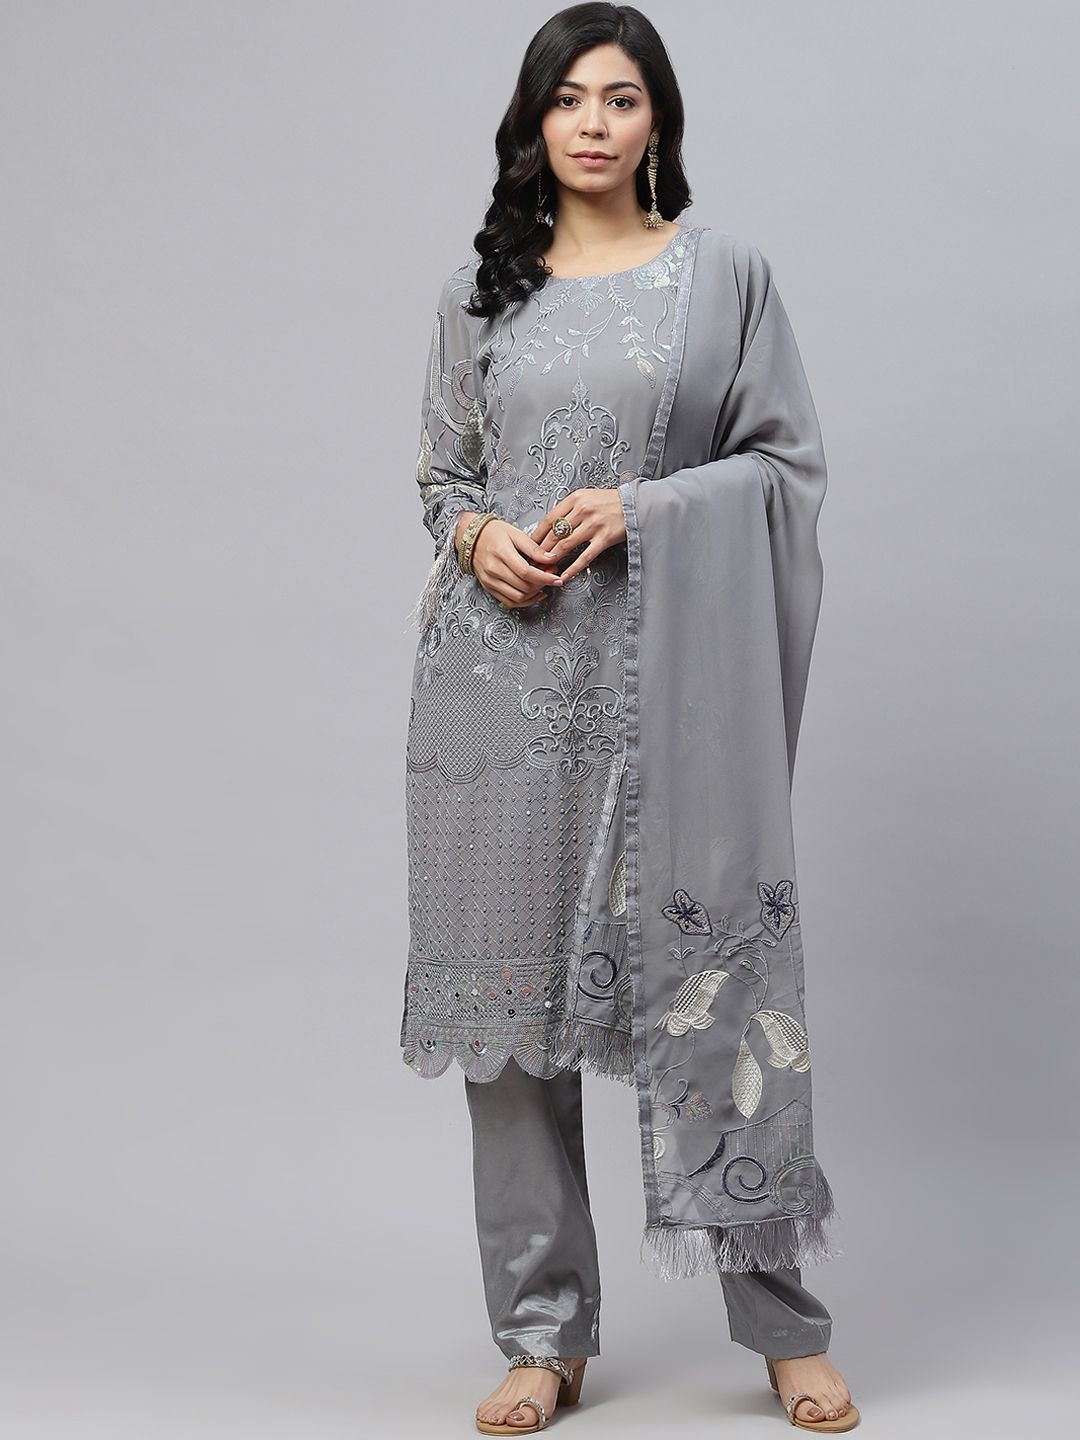 Readiprint Fashions Women Grey & Silver Embroidered Unstitched Kurta Set Material Price in India